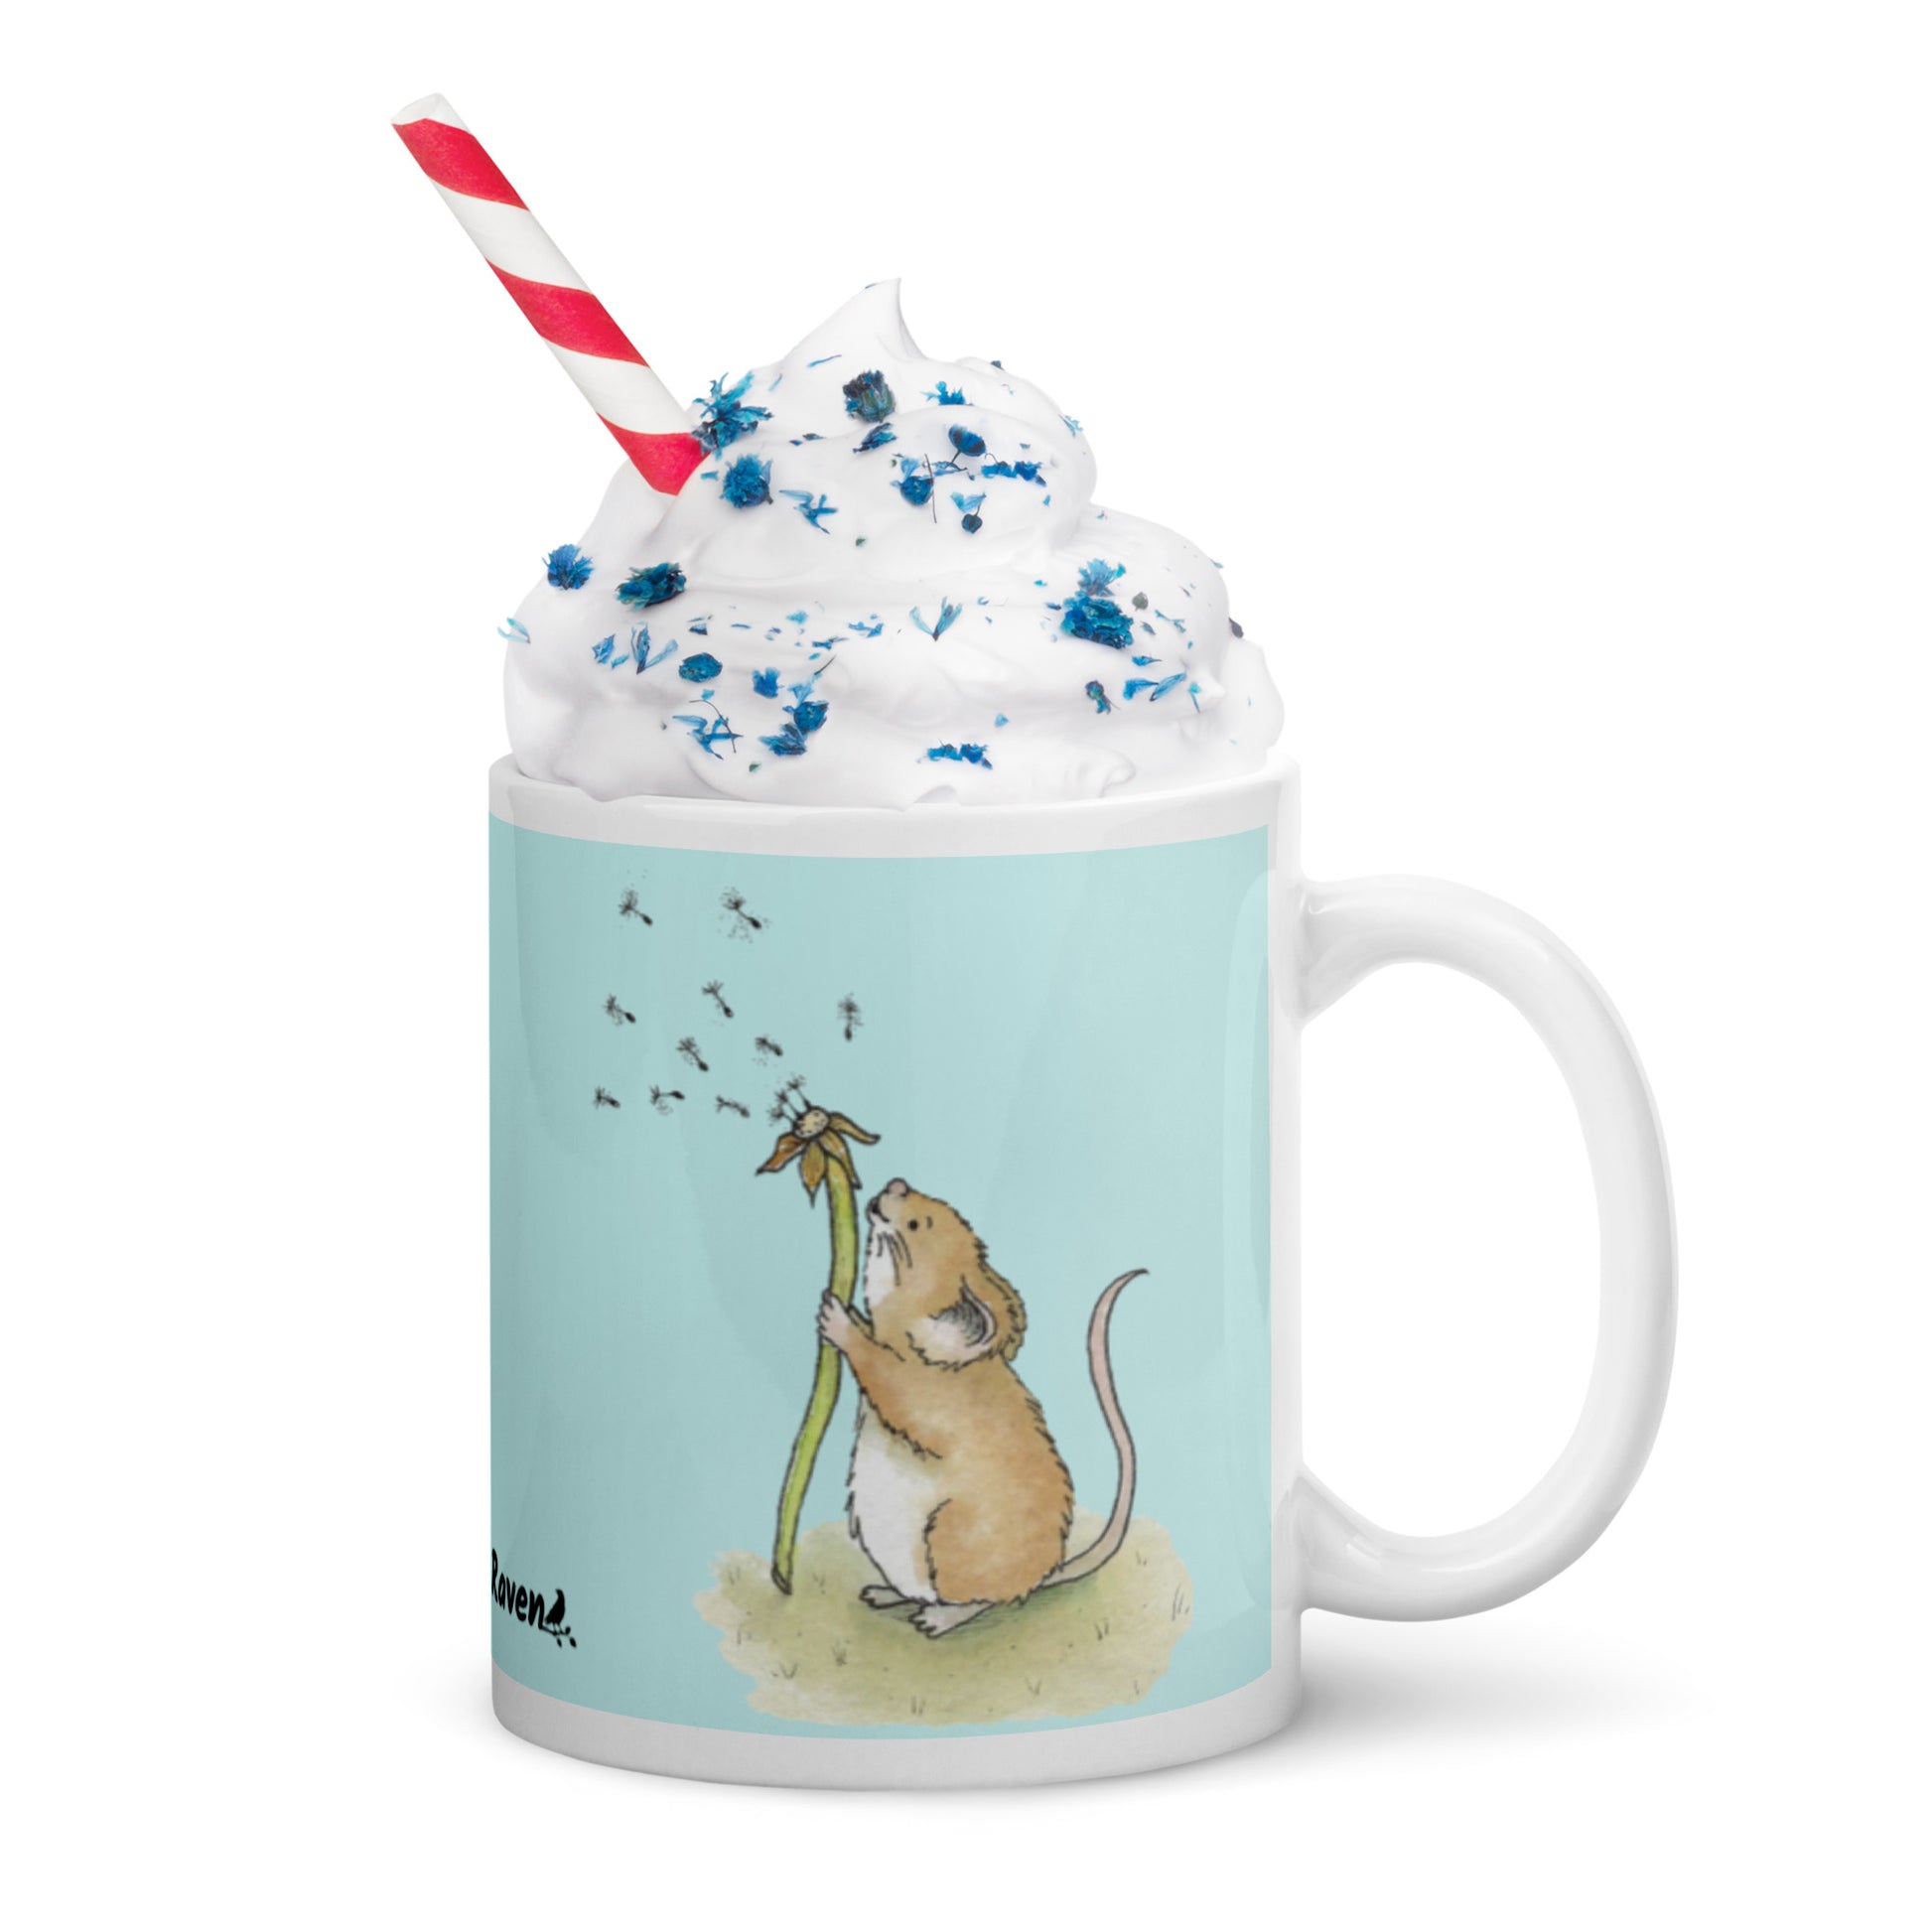 Two-sided image of original Dandelion wish design of cute watercolor mouse blowing dandelion seeds  featured on 11 ounce mug with light blue background.